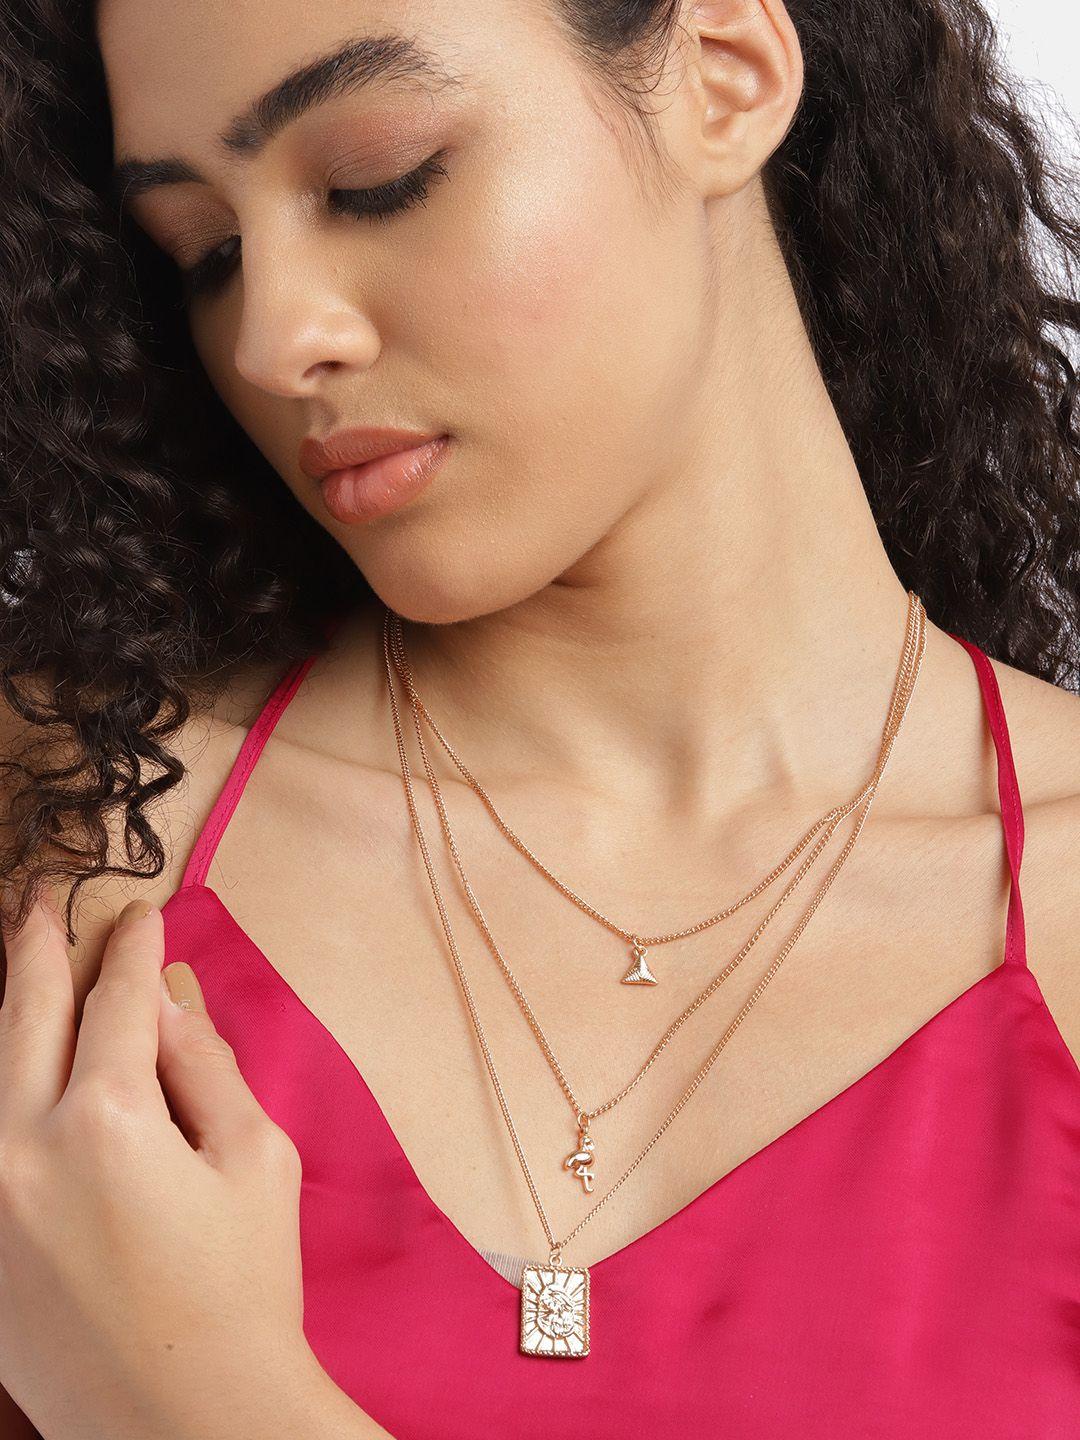 dressberry rose gold-toned layered necklace